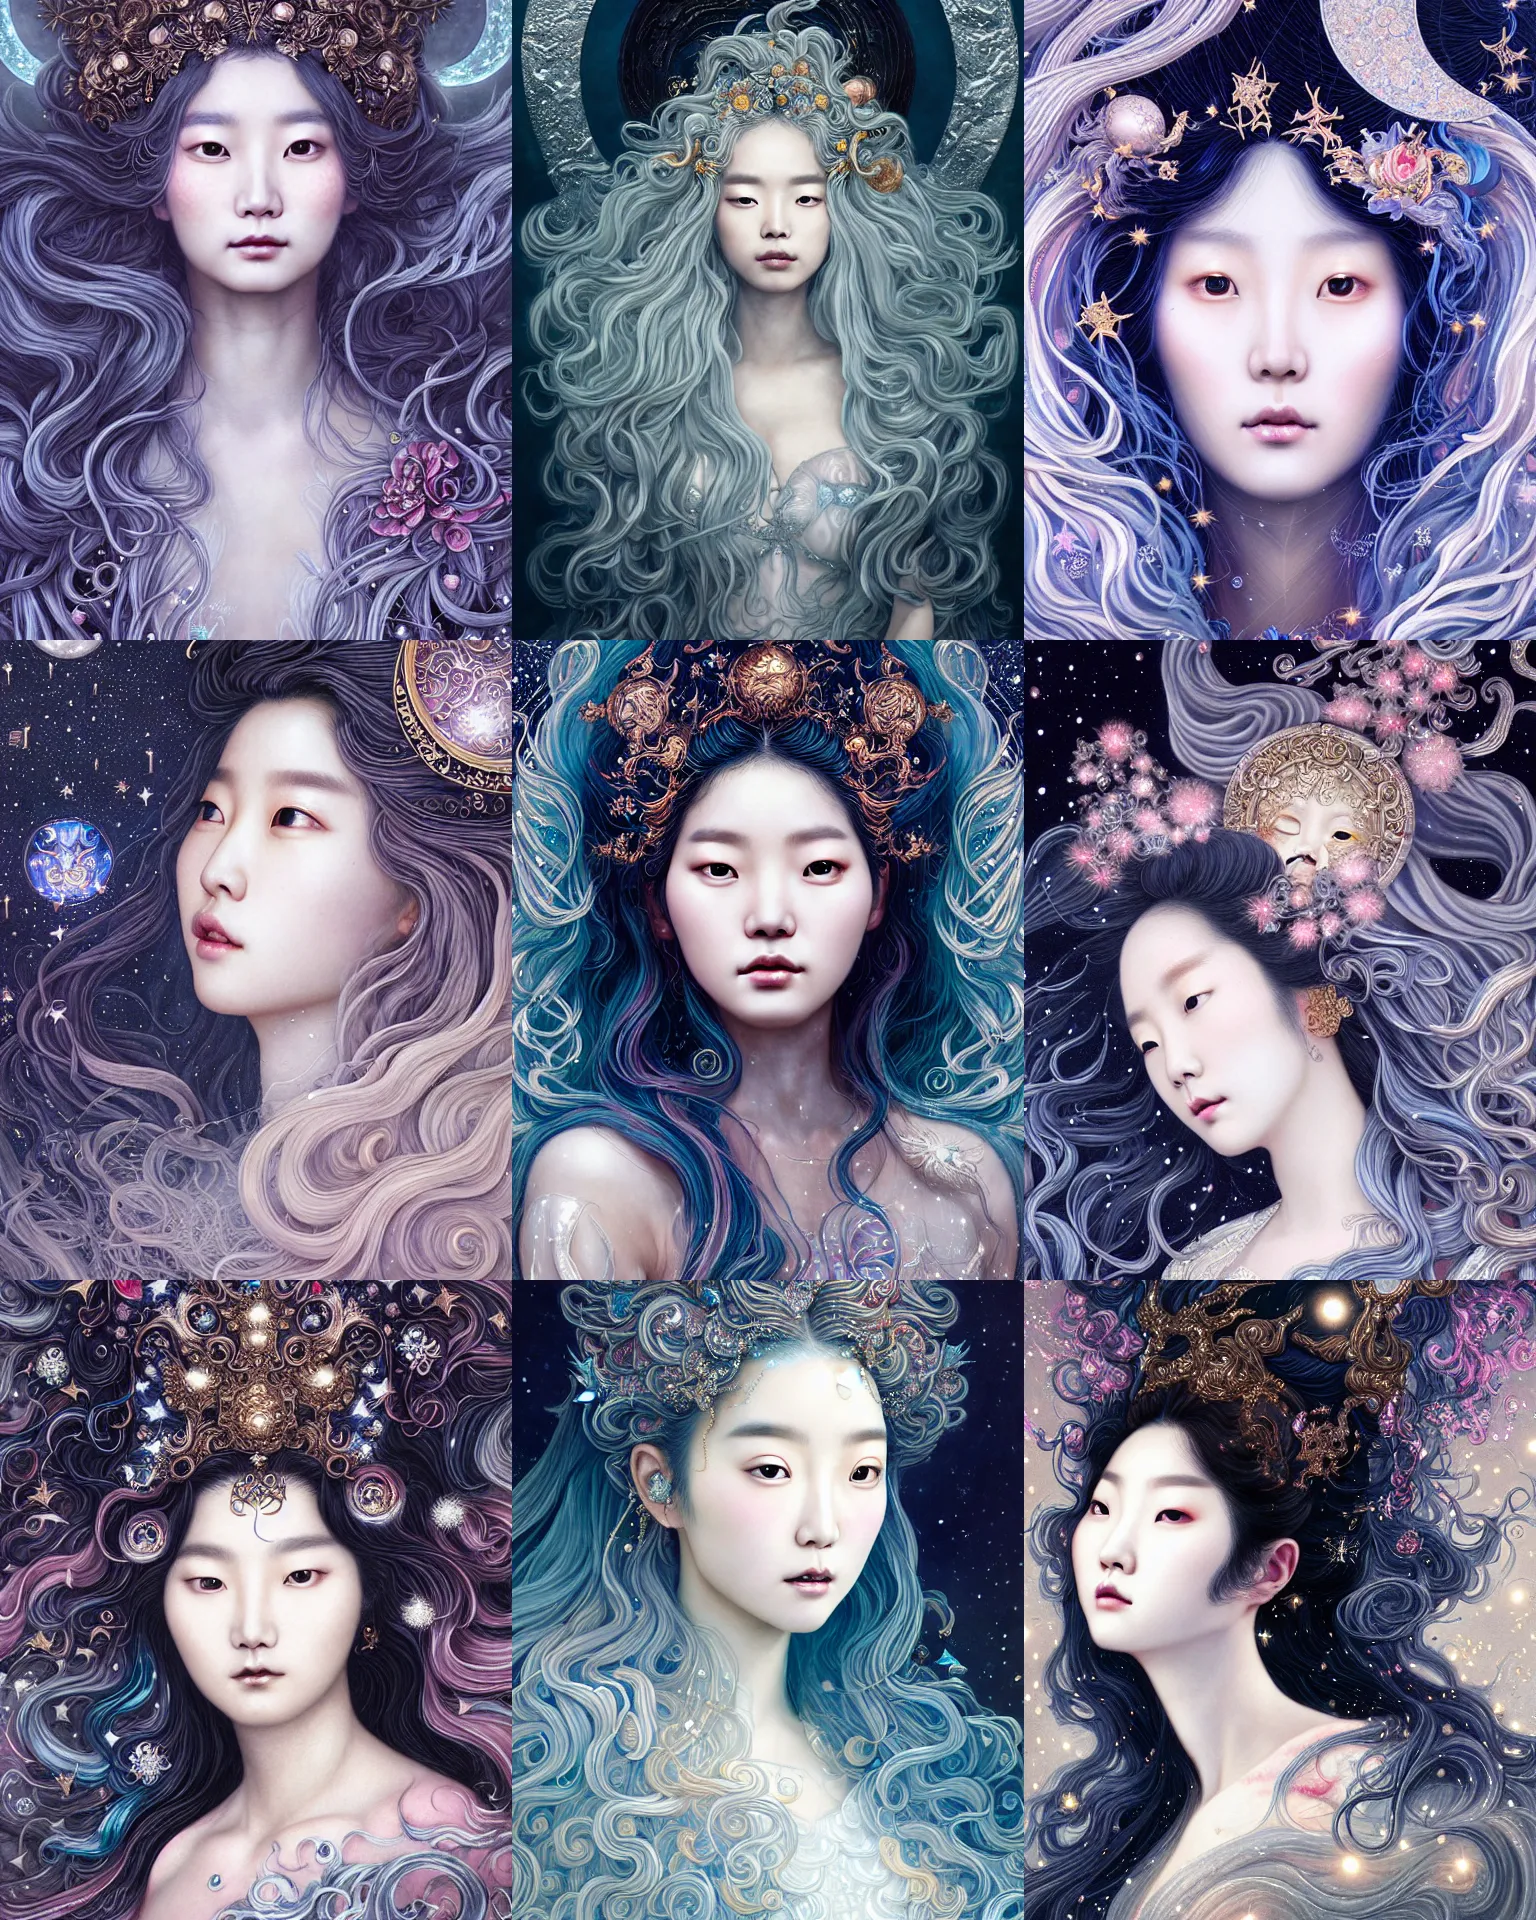 Prompt: baroque neoclassicist closeup portrait of lee jin - eun as a beautiful moon goddess with stars in her flowing hair, reflective detailed textures, glittering multiversal ornaments, dark fantasy scifi painting by james jean, martine johanna, ross tran, conrad roset, takato yomamoto, dramatic lighting, gleaming silver and soft rich colors